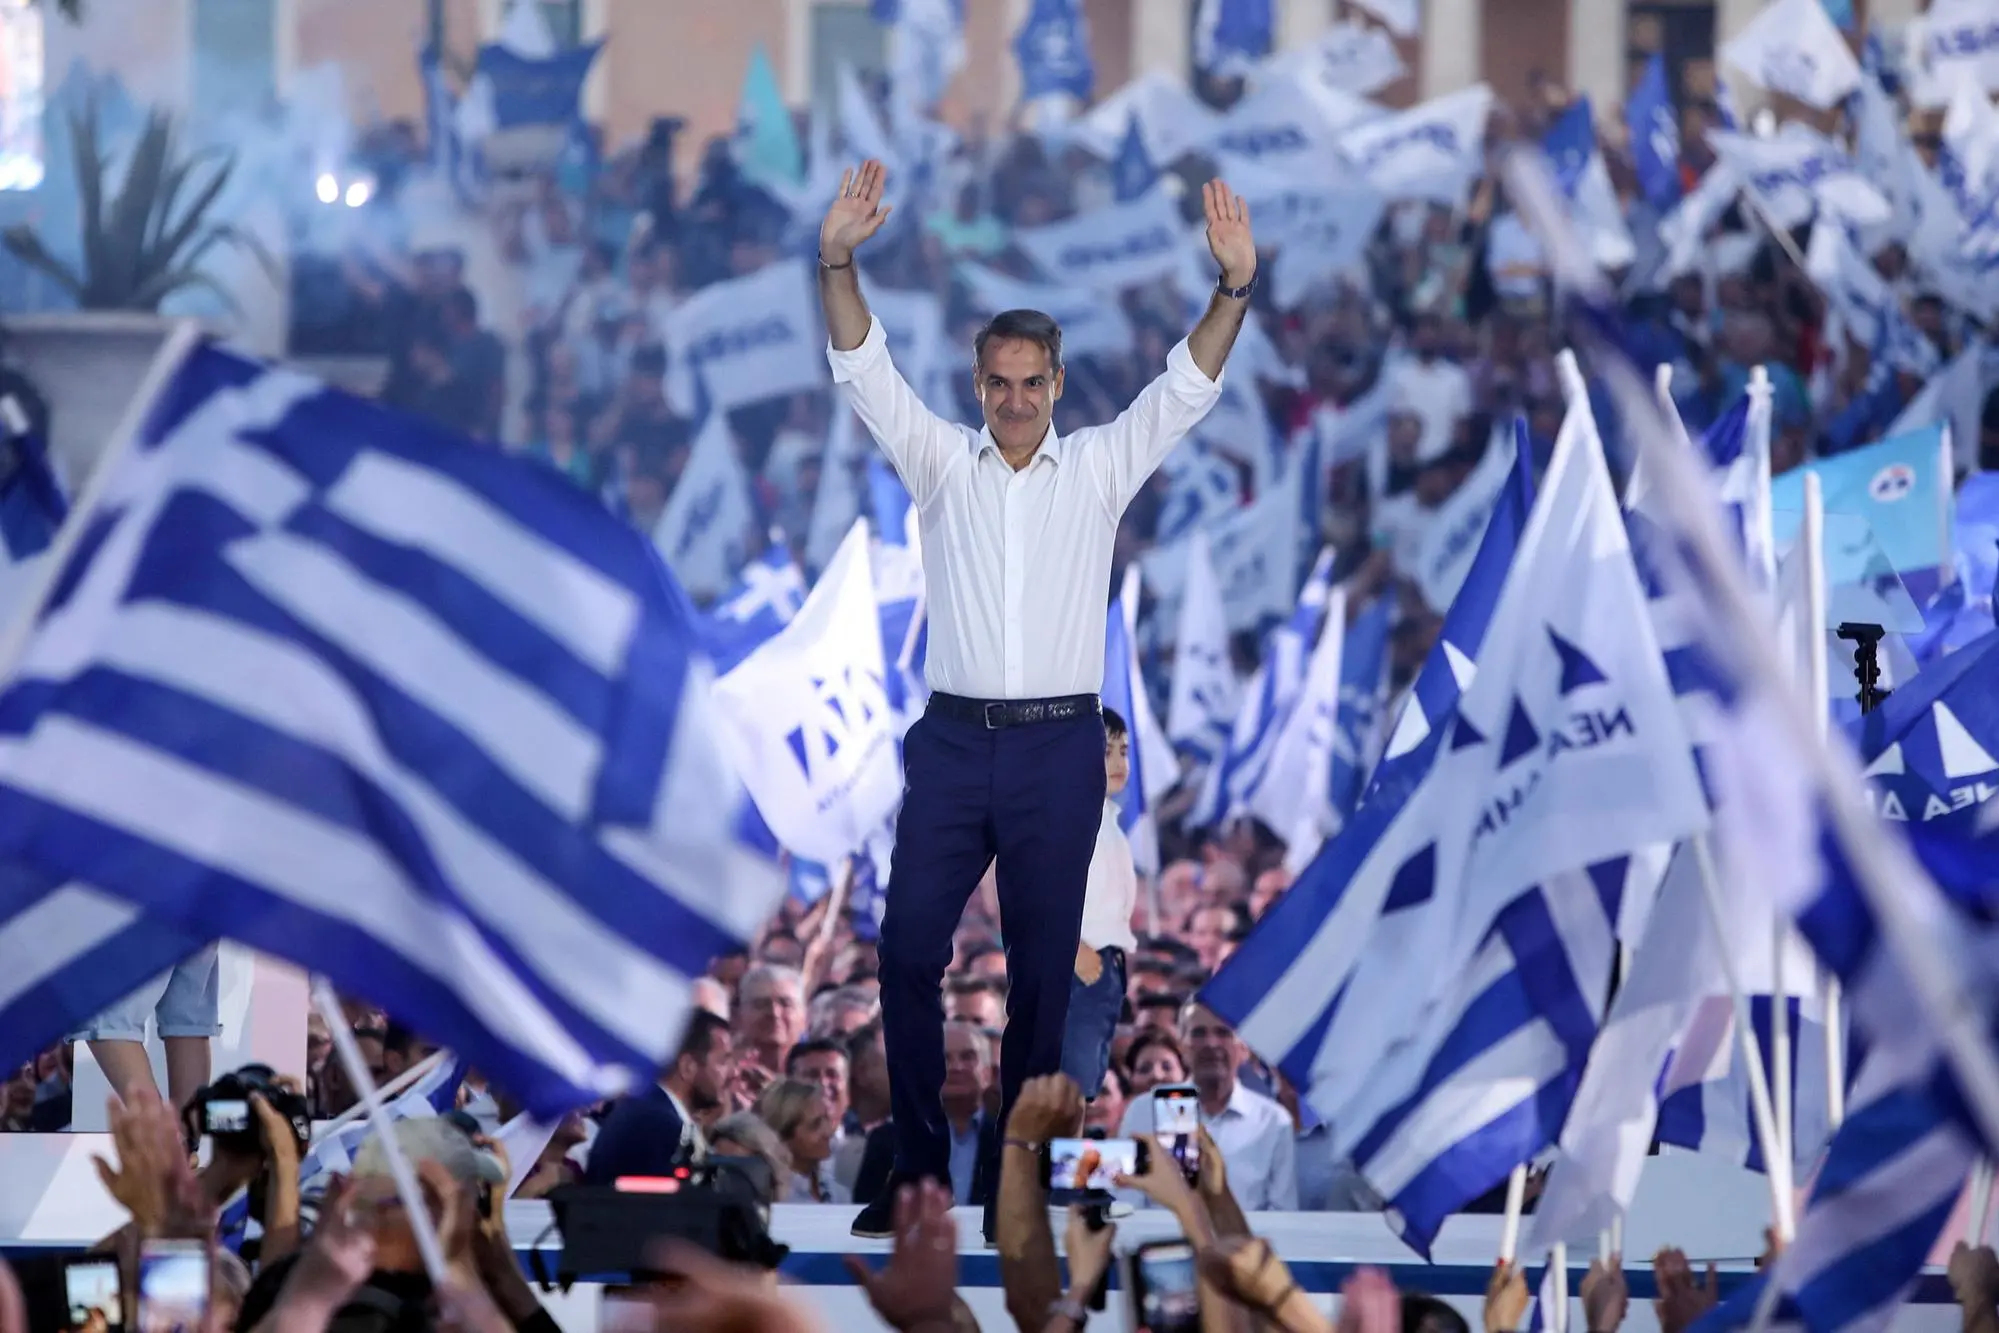 epa10708568 Leader of New Democracy party Kyriakos Mitsotakis waves to his supporters during his main pre-election rally, at Syntagma square in Athens, Greece, 23 June 2023. Greece's national and parliamentary elections will be held on 25 June. EPA/GEORGE VITSARAS